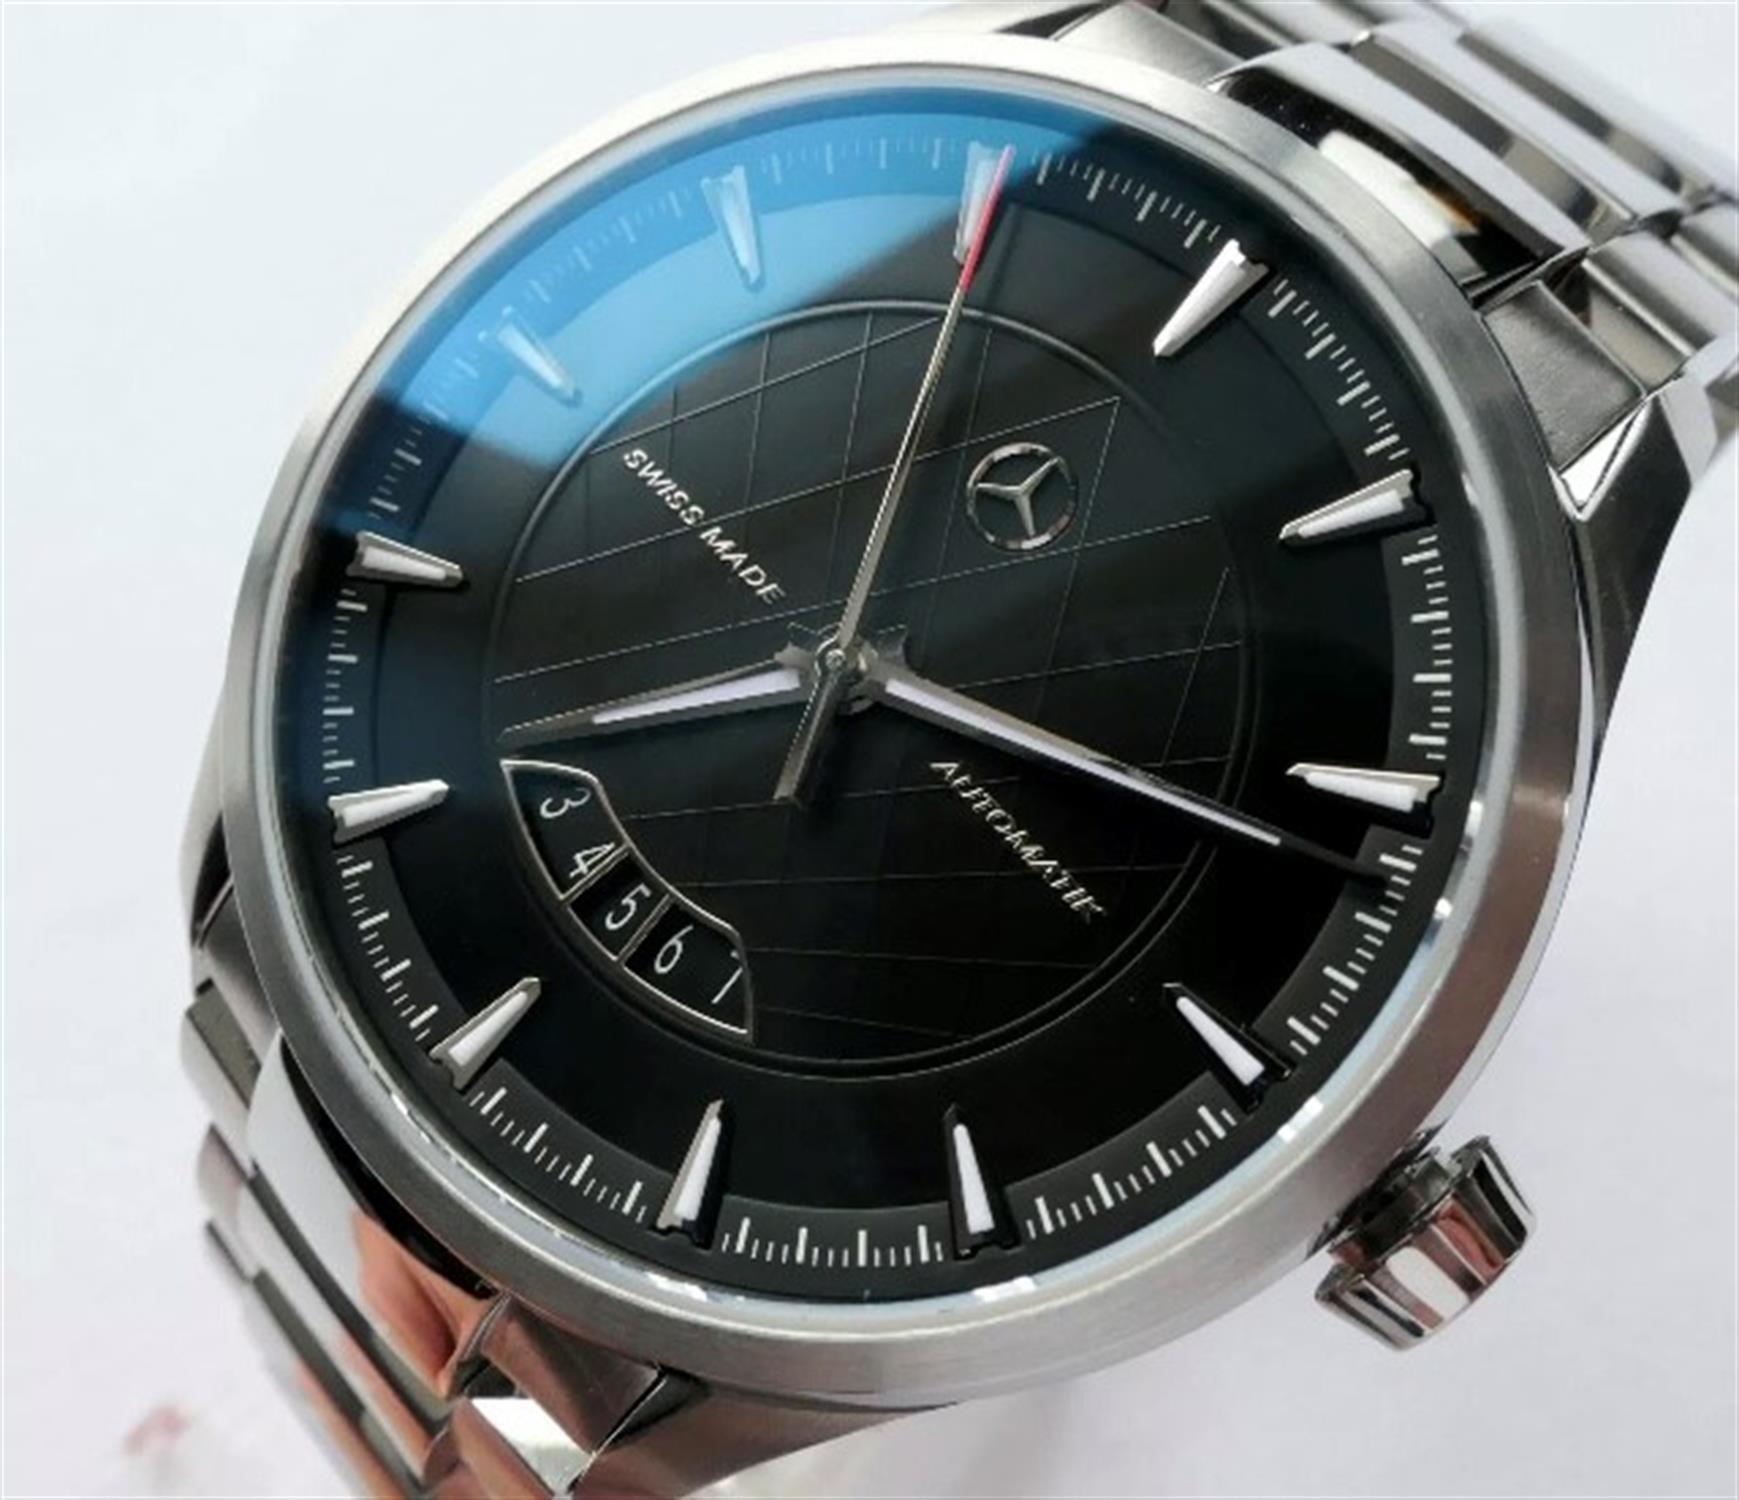 A Brand New Mercedes-Benz Classic Automatic Watch - Image 4 of 10